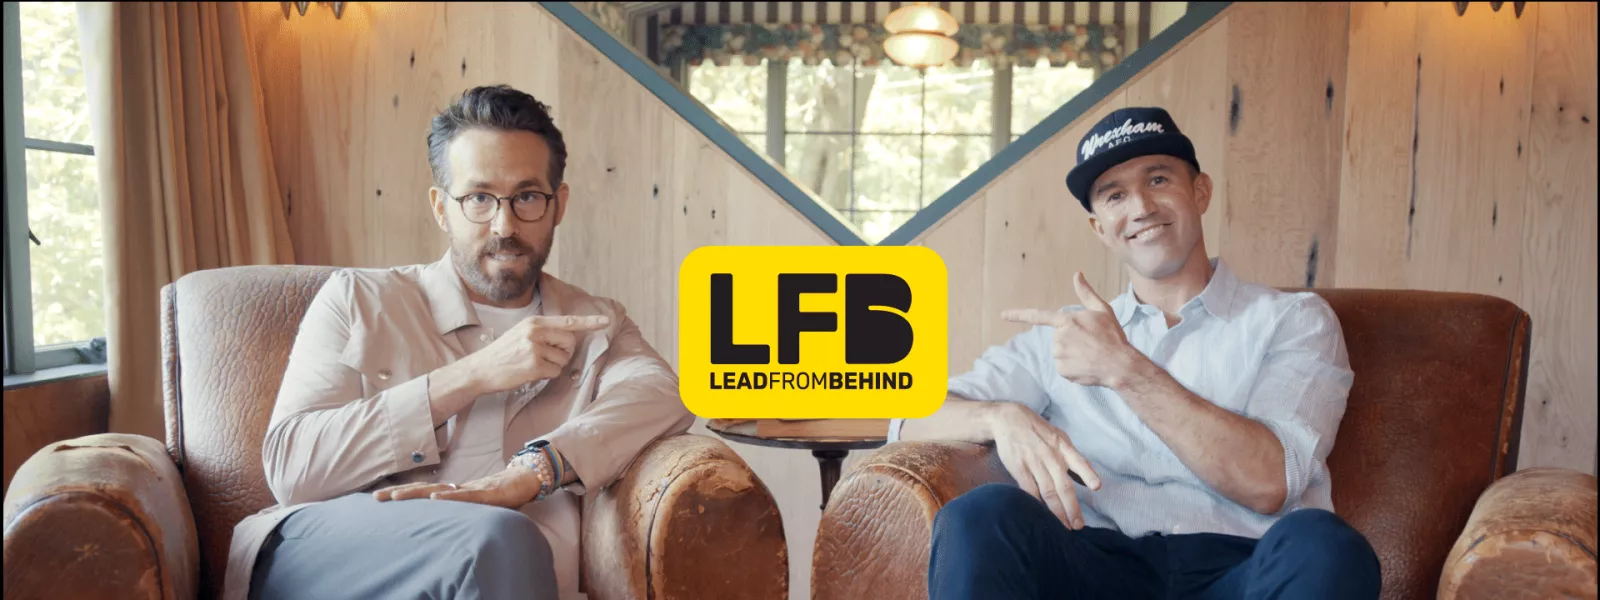 LEAD FROM BEHIND video